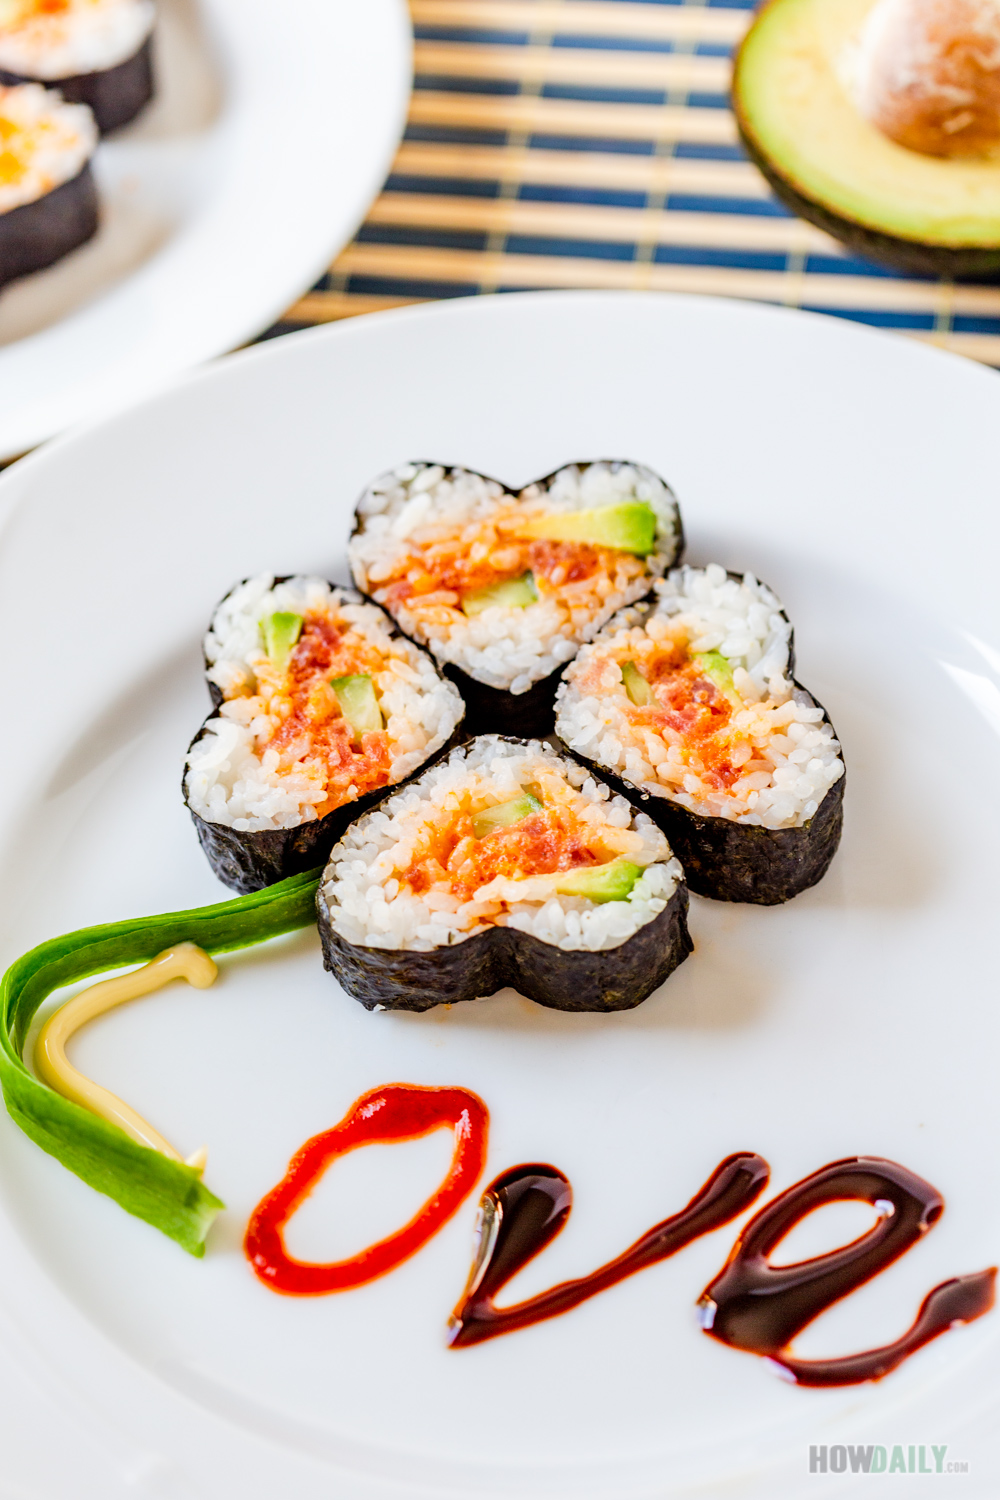 https://howdaily.com/wp-content/uploads/2018/04/dynamite-sushi-roll.jpg